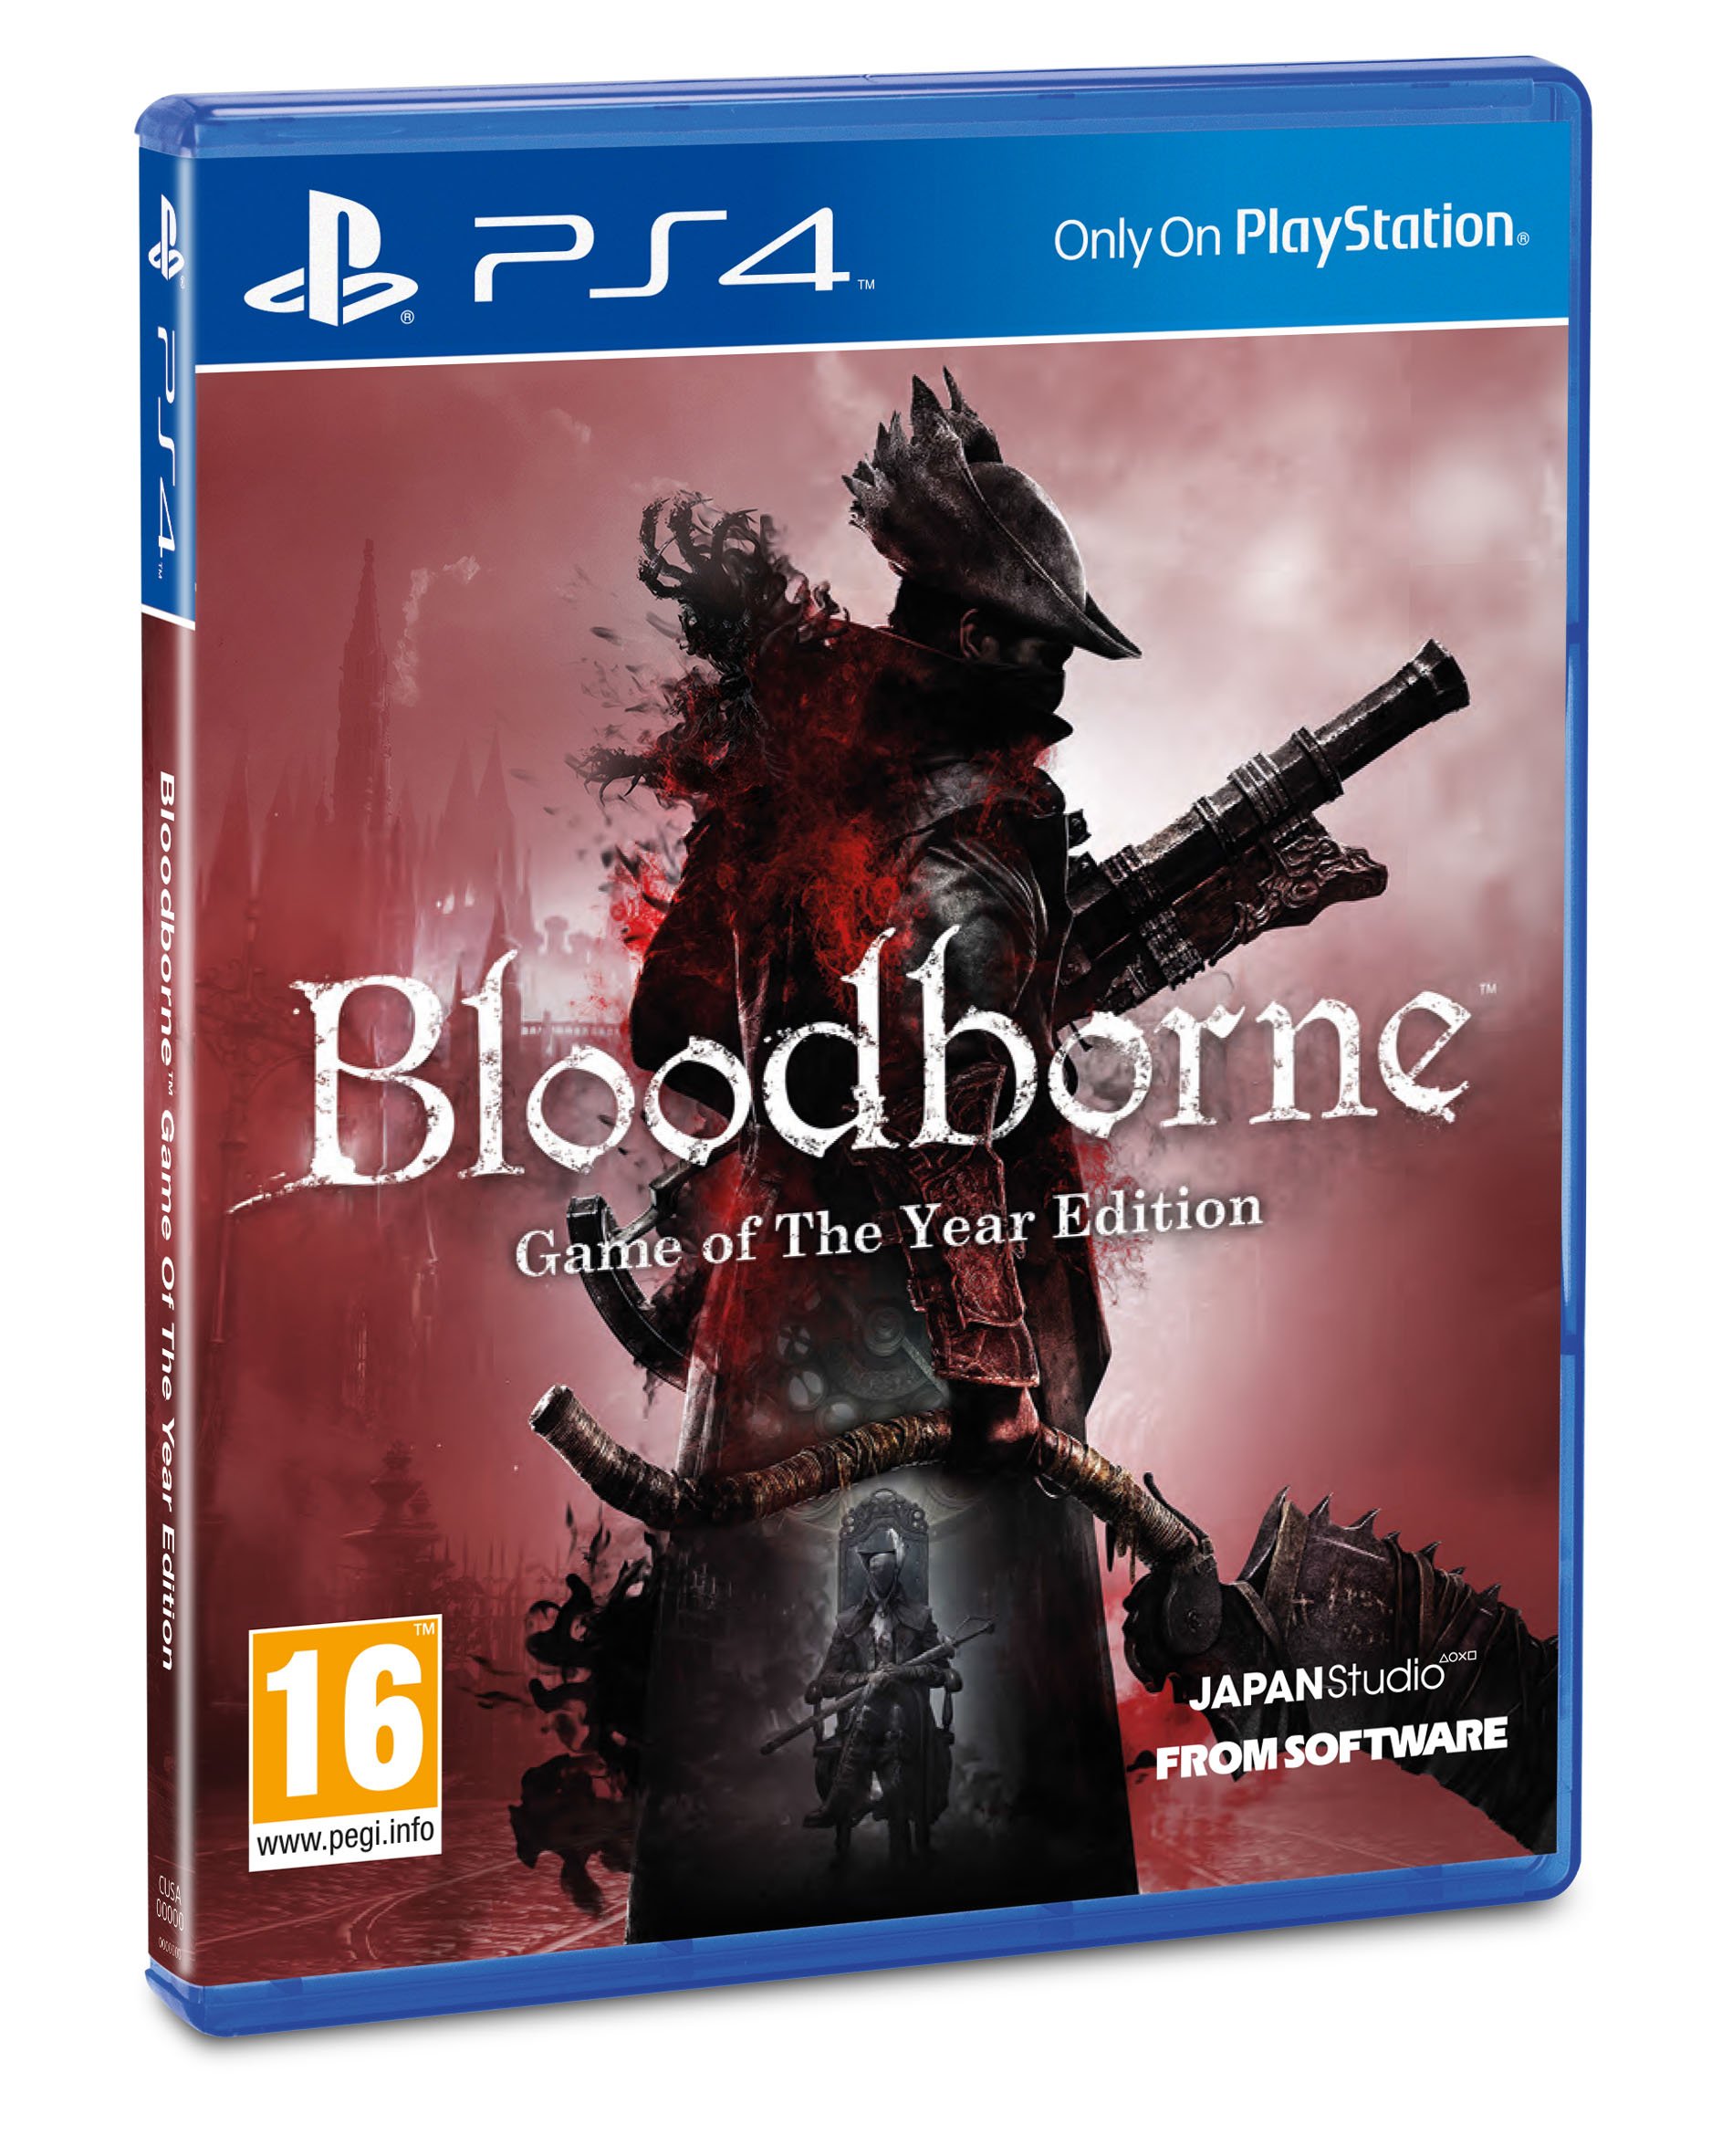 Bloodborne has NOT been announced for PC as of December 2023